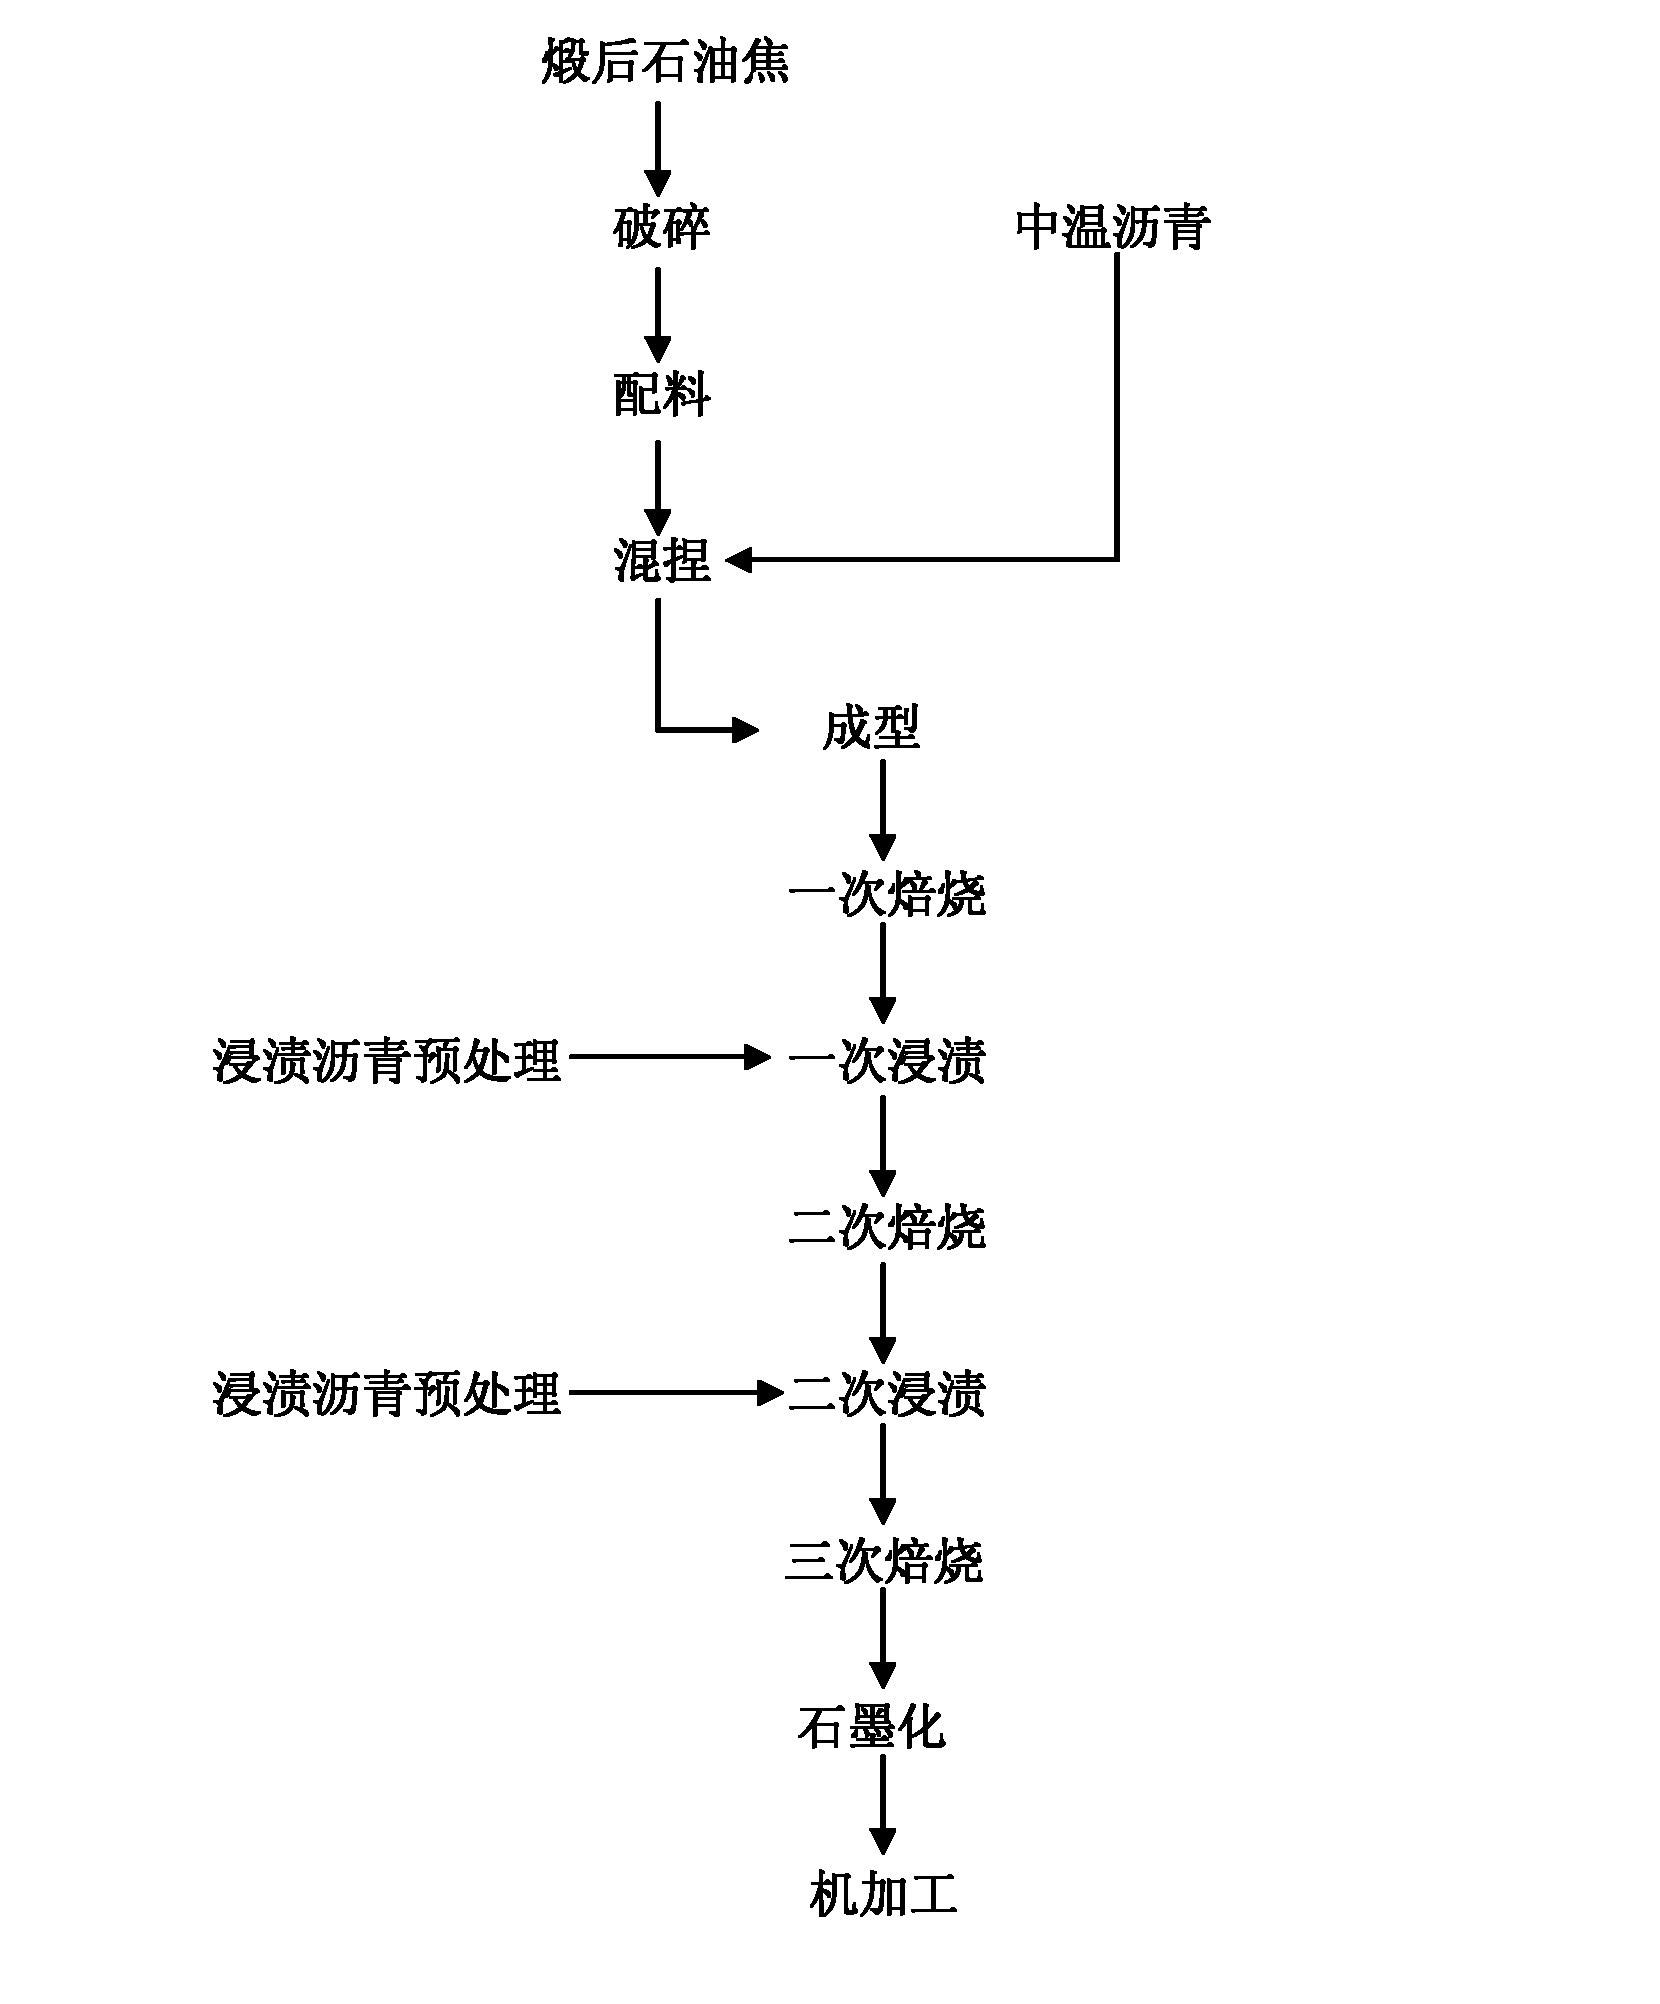 Graphite material for monocrystalline silicon growth thermal field in solar photovoltaic industry and production method thereof